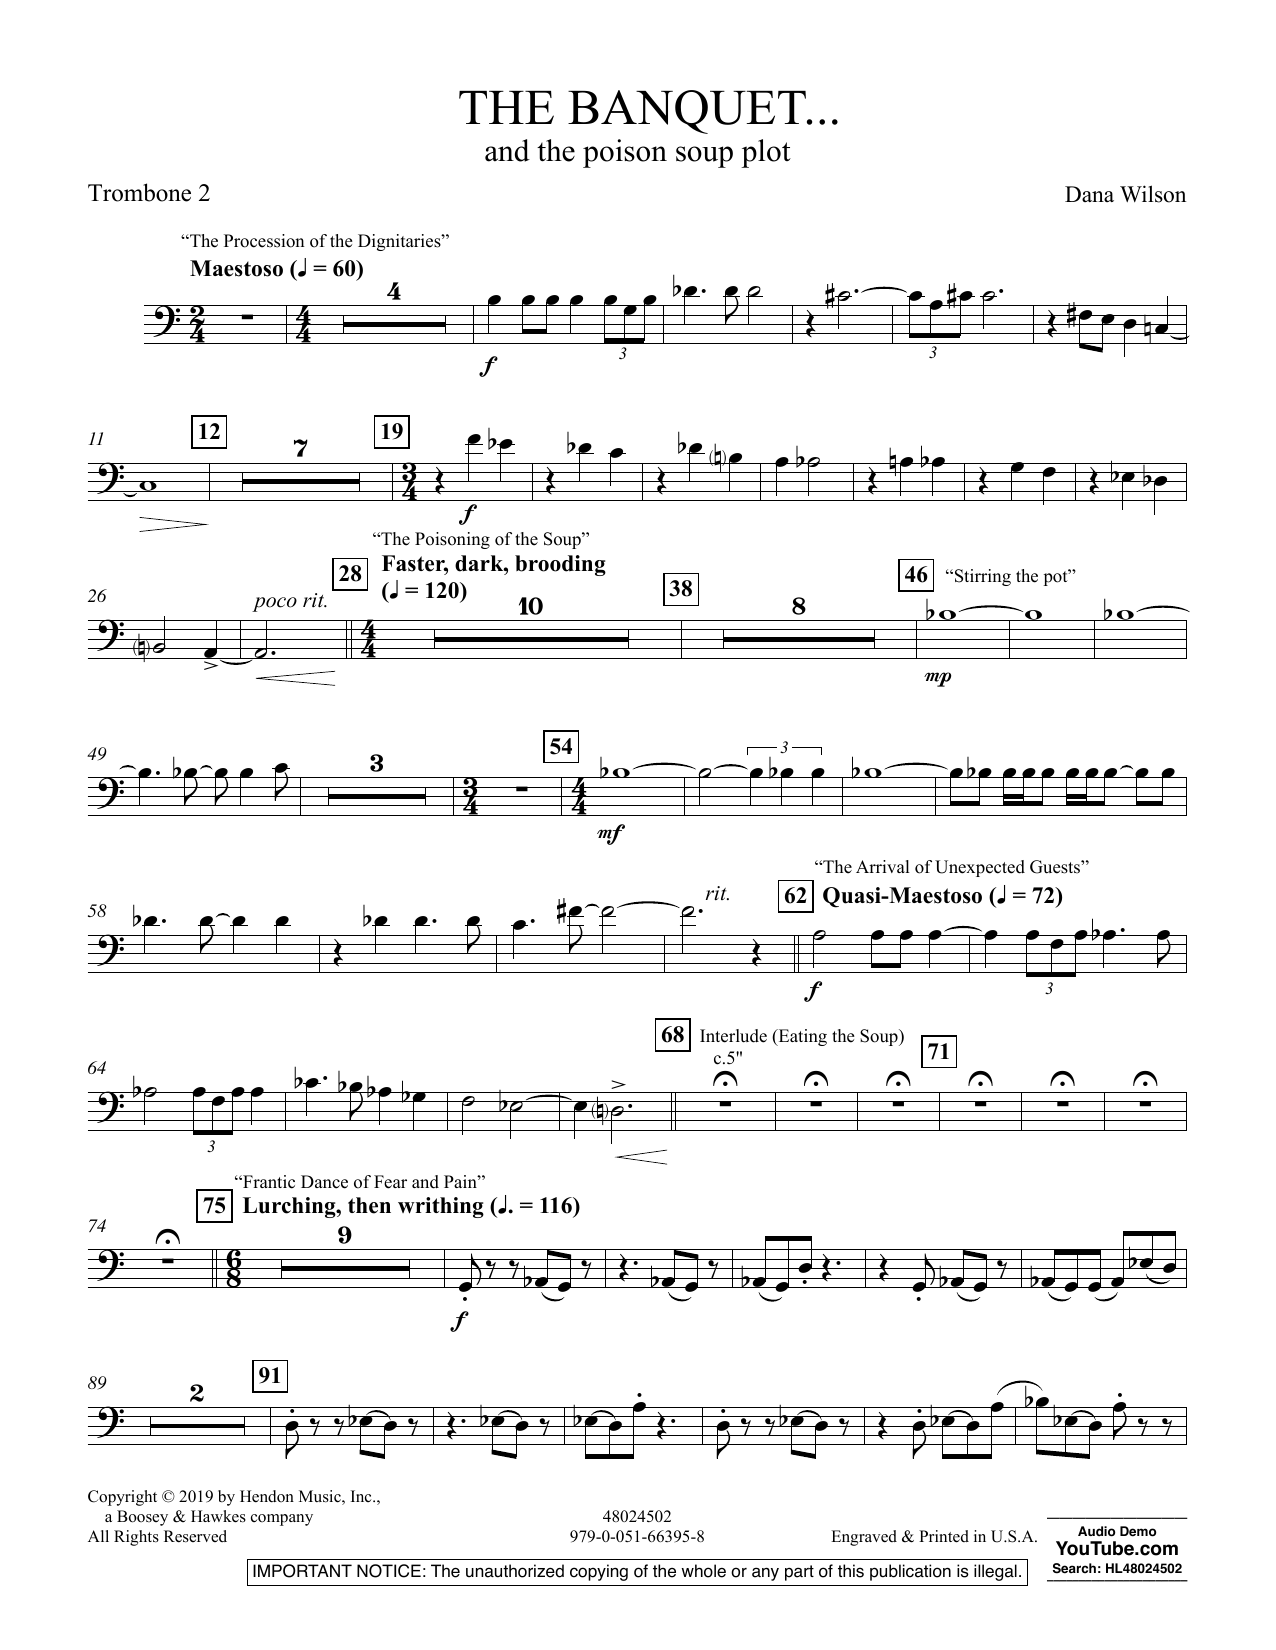 Dana Wilson The Banquet...and the poison soup plot - Trombone 2 sheet music preview music notes and score for Concert Band including 2 page(s)